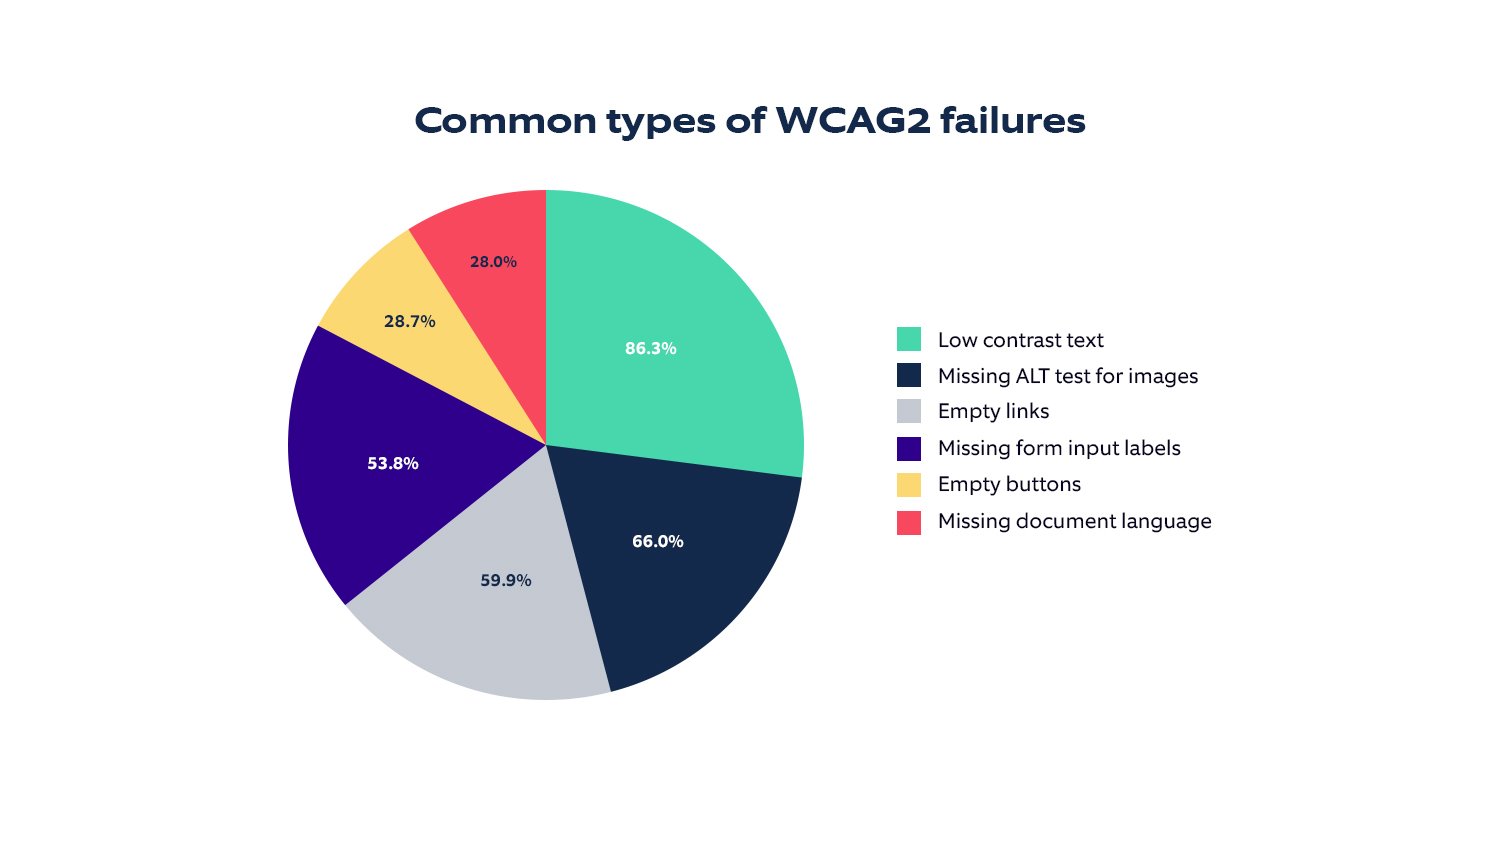 Pie chart representing types of WCAG2 failures